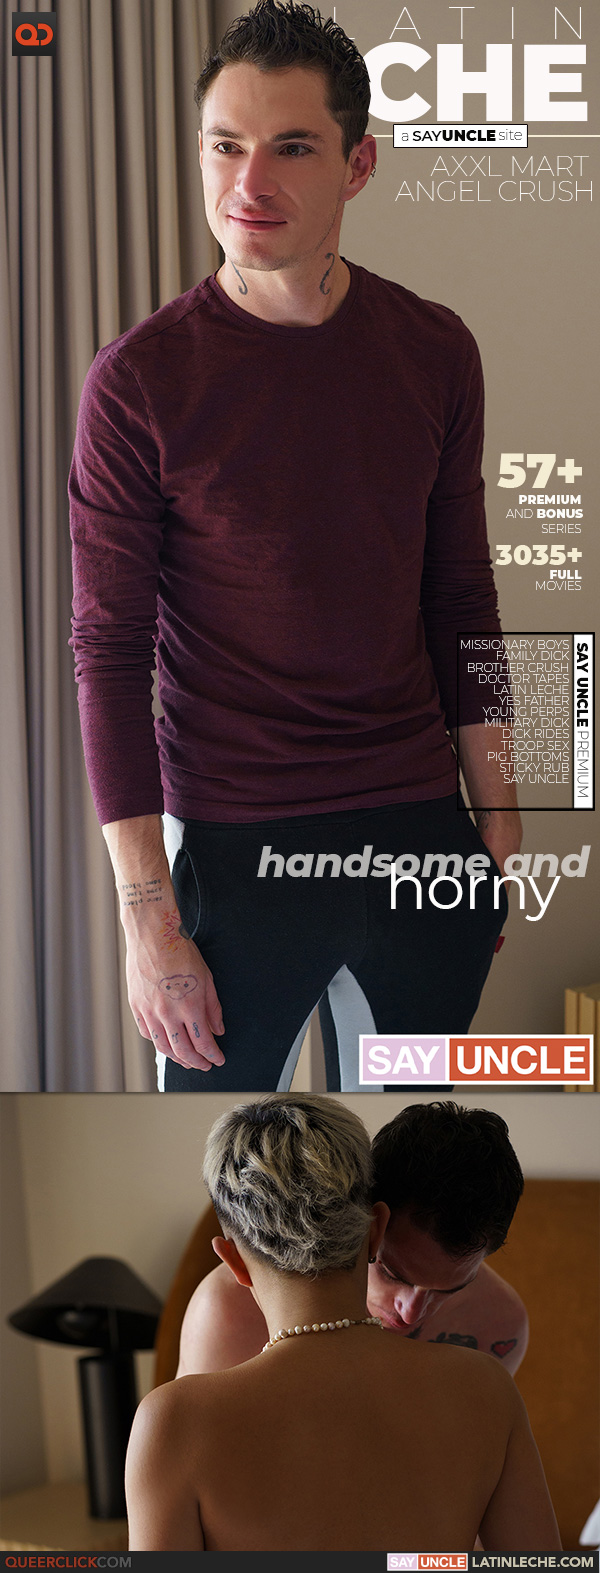 Say Uncle | Latin Leche: Angel Crush and Axxl Mart - Handsome and Horny